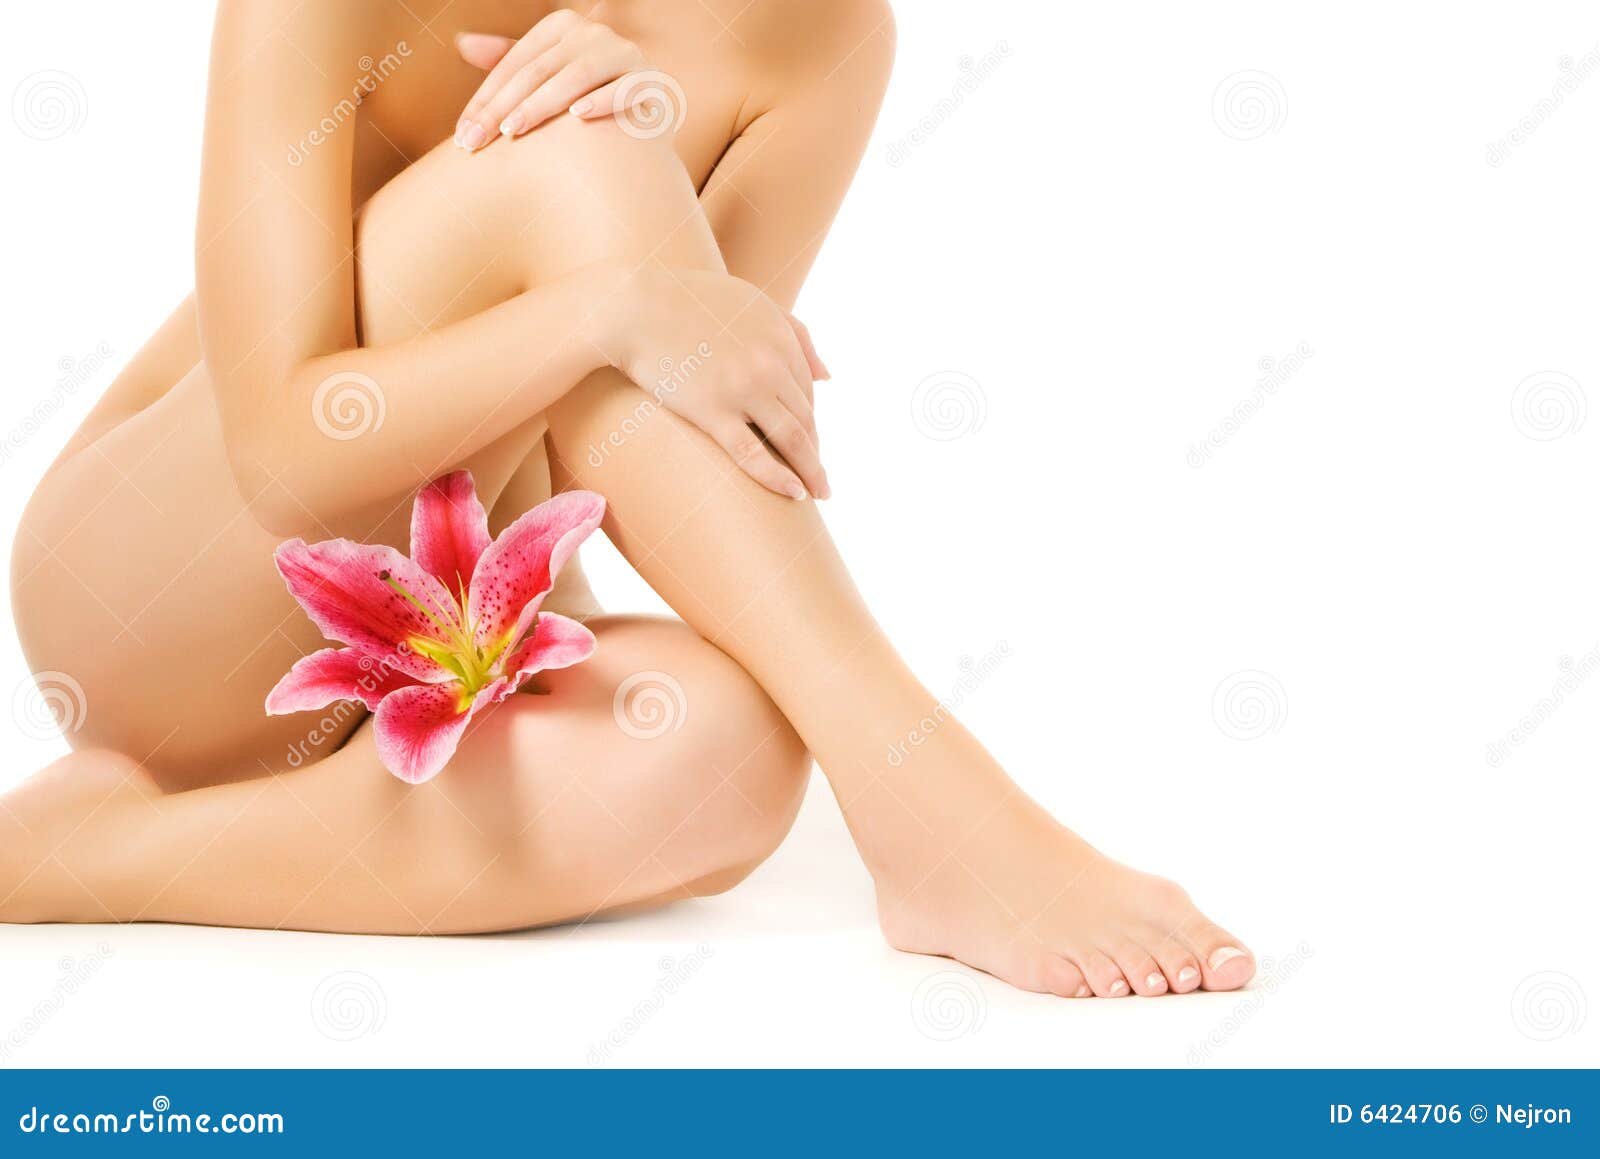 female legs with pink lily